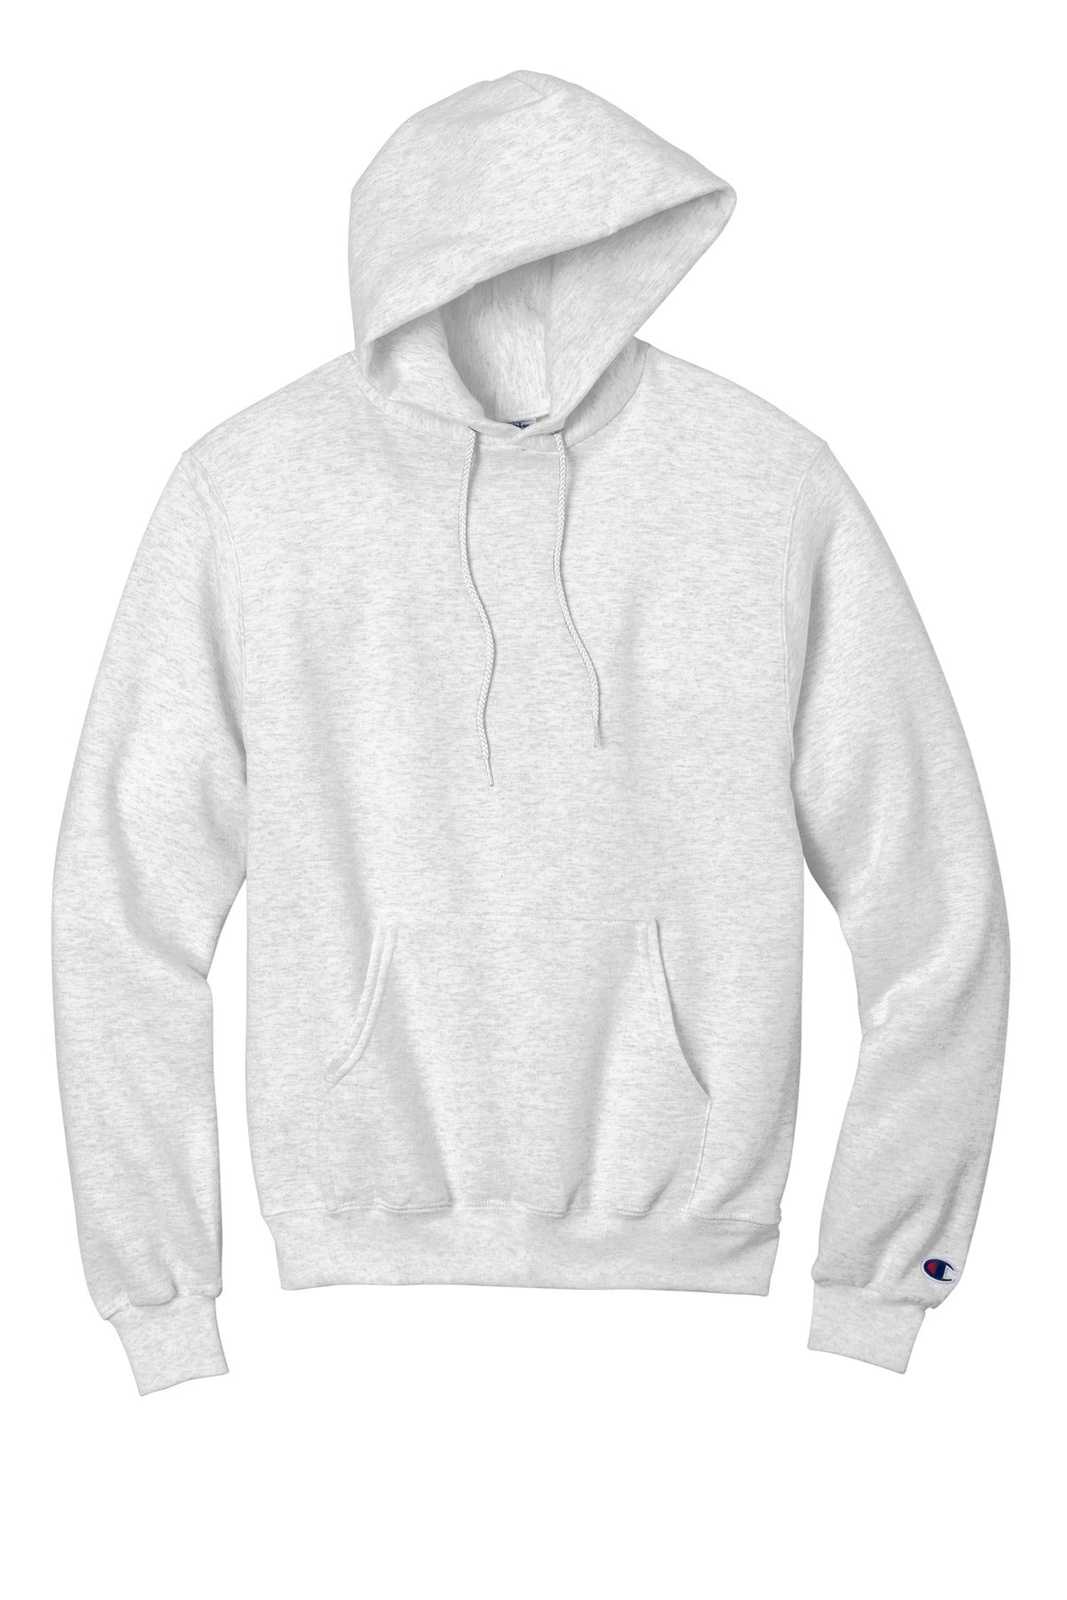 Champion S700 Powerblend Pullover Hoodie - Silver Grey